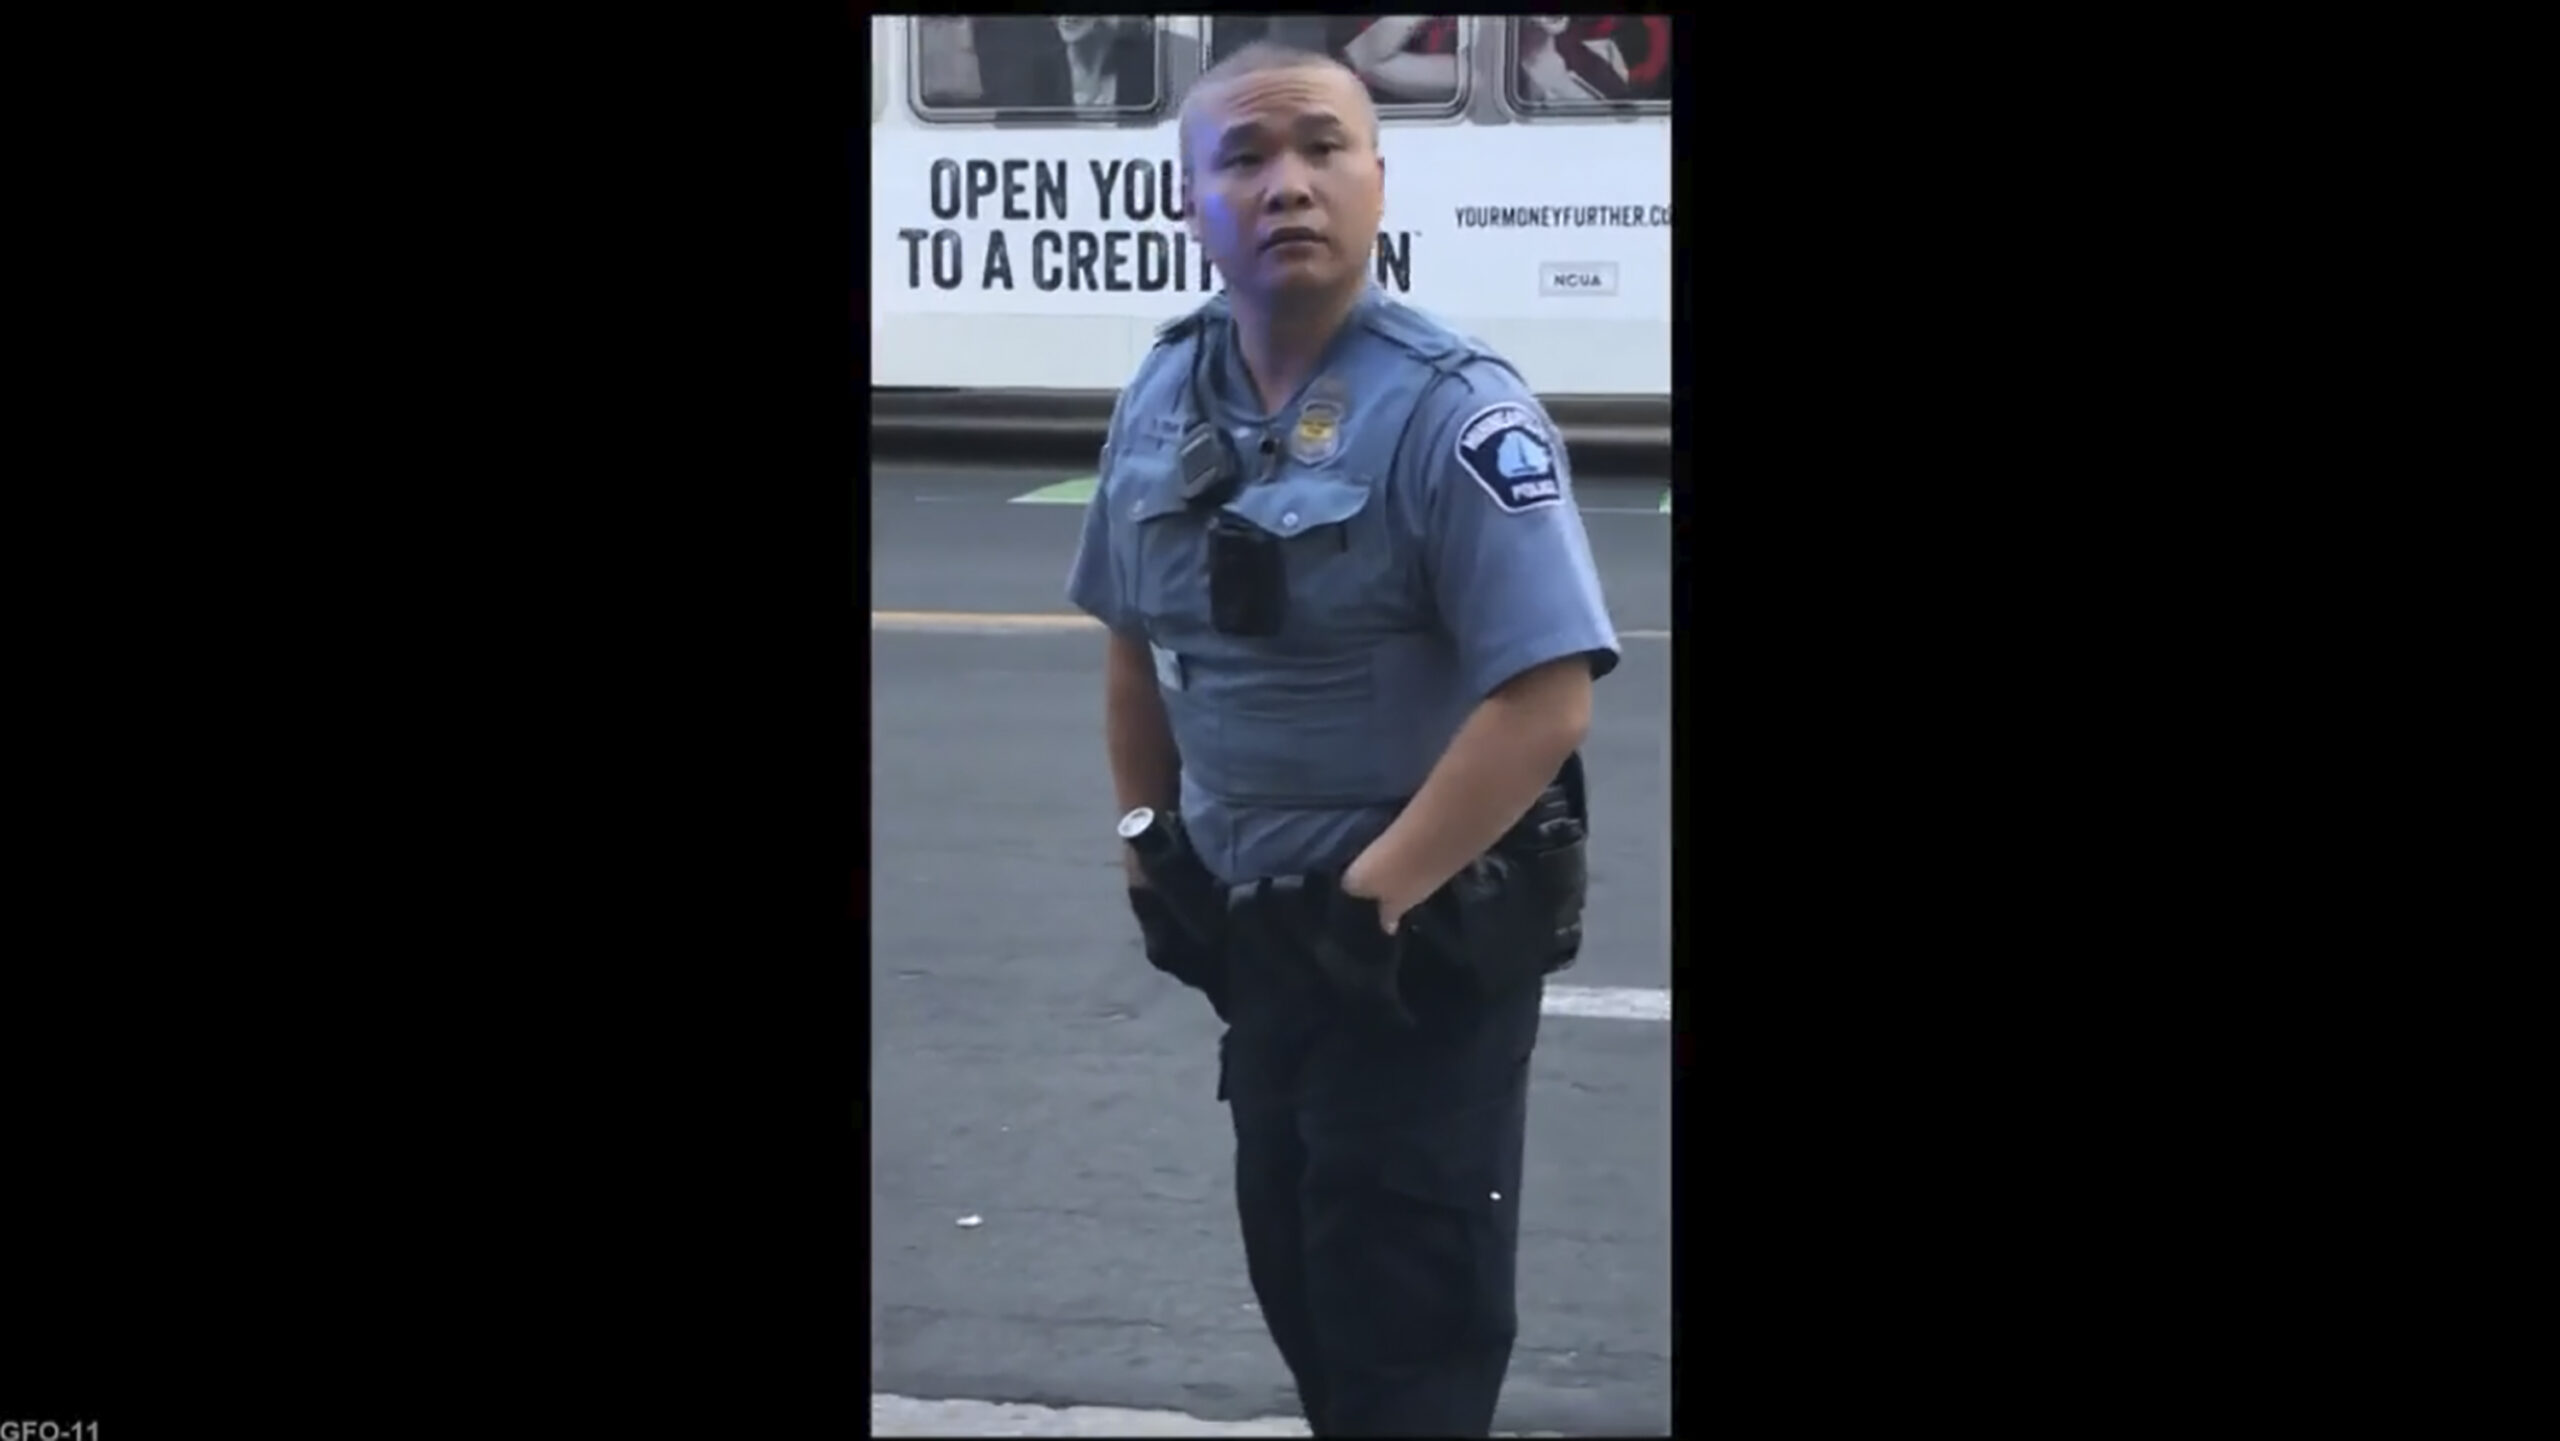 In this screen grab from video, former Minneapolis police officer Tou Thao appears at the scene where George Floyd died at the hands of former police officer Derek Chauvin, on May 25, 2020, in Minneapolis, Minn. Thao, who held back bystanders while his colleagues restrained a dying George Floyd, was found guilty on Monday, May 1, 2023 of aiding and abetting manslaughter. Photo credit: Court TV via AP, pool